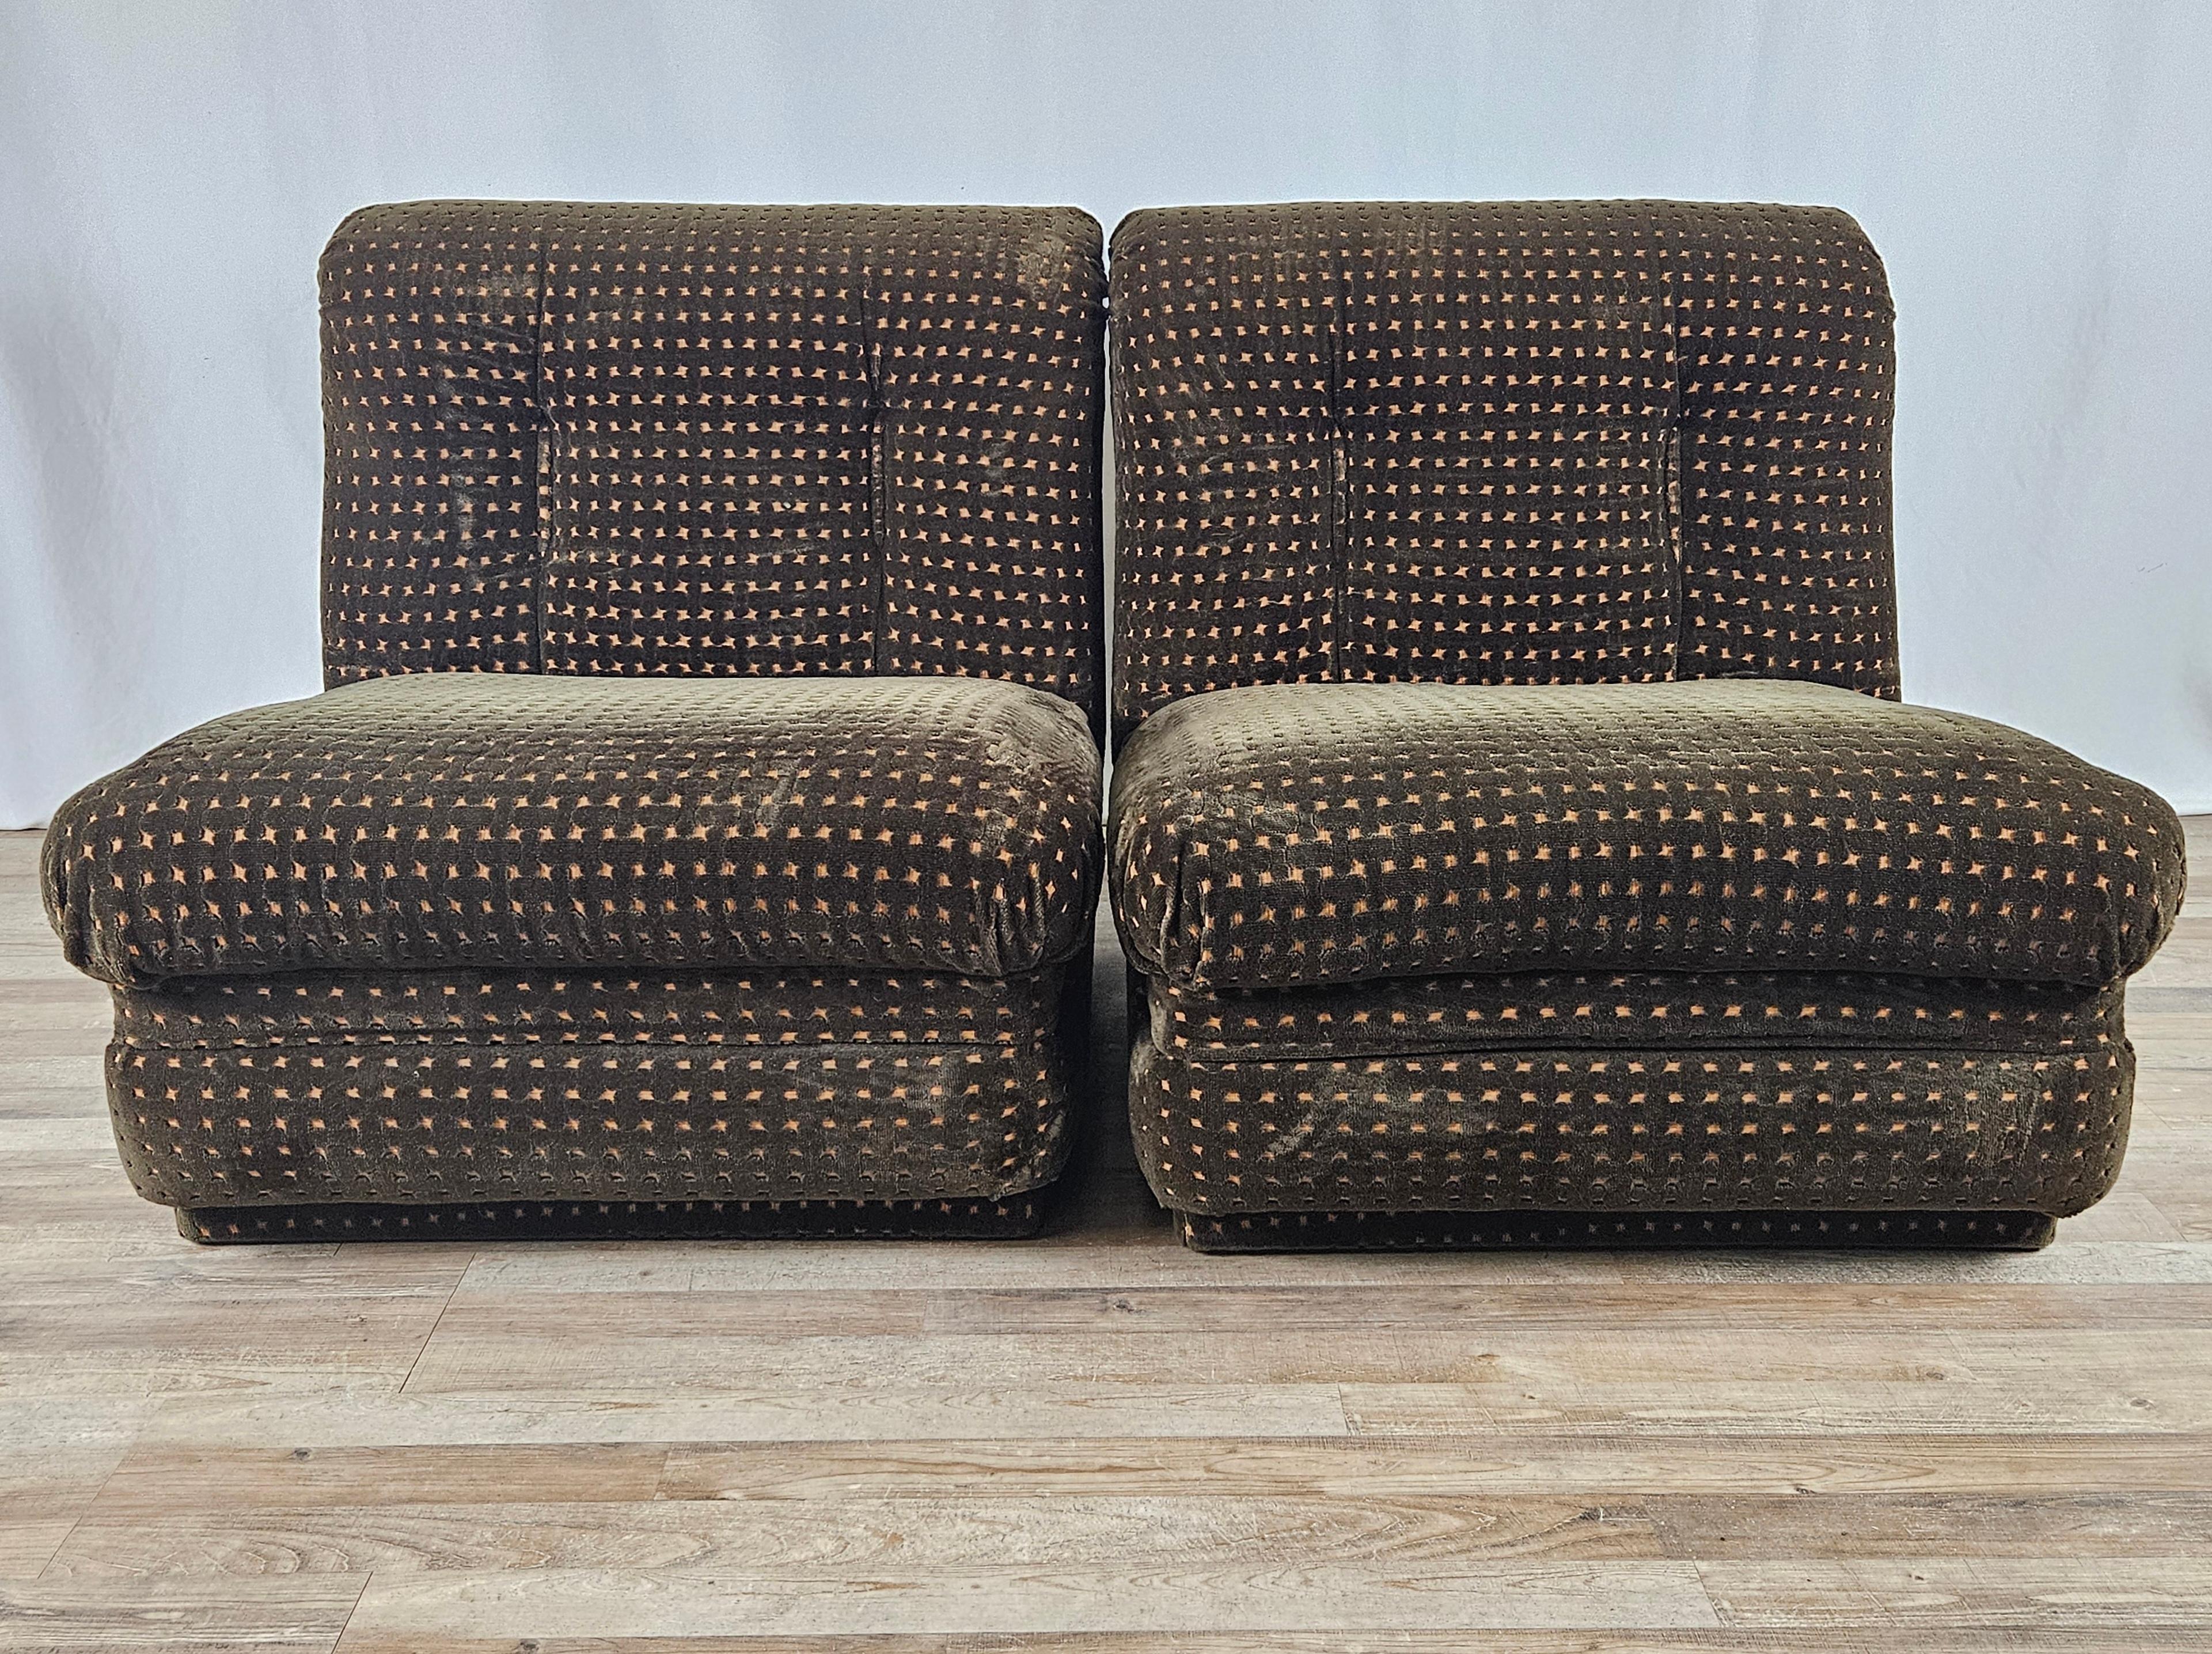 Set of 3 1970s modular fabric armchairs with low steel feet.

Perfect for waiting rooms, living rooms or large halls furnished in any style from antique to modern.

They show normal signs of wear due to age and use.